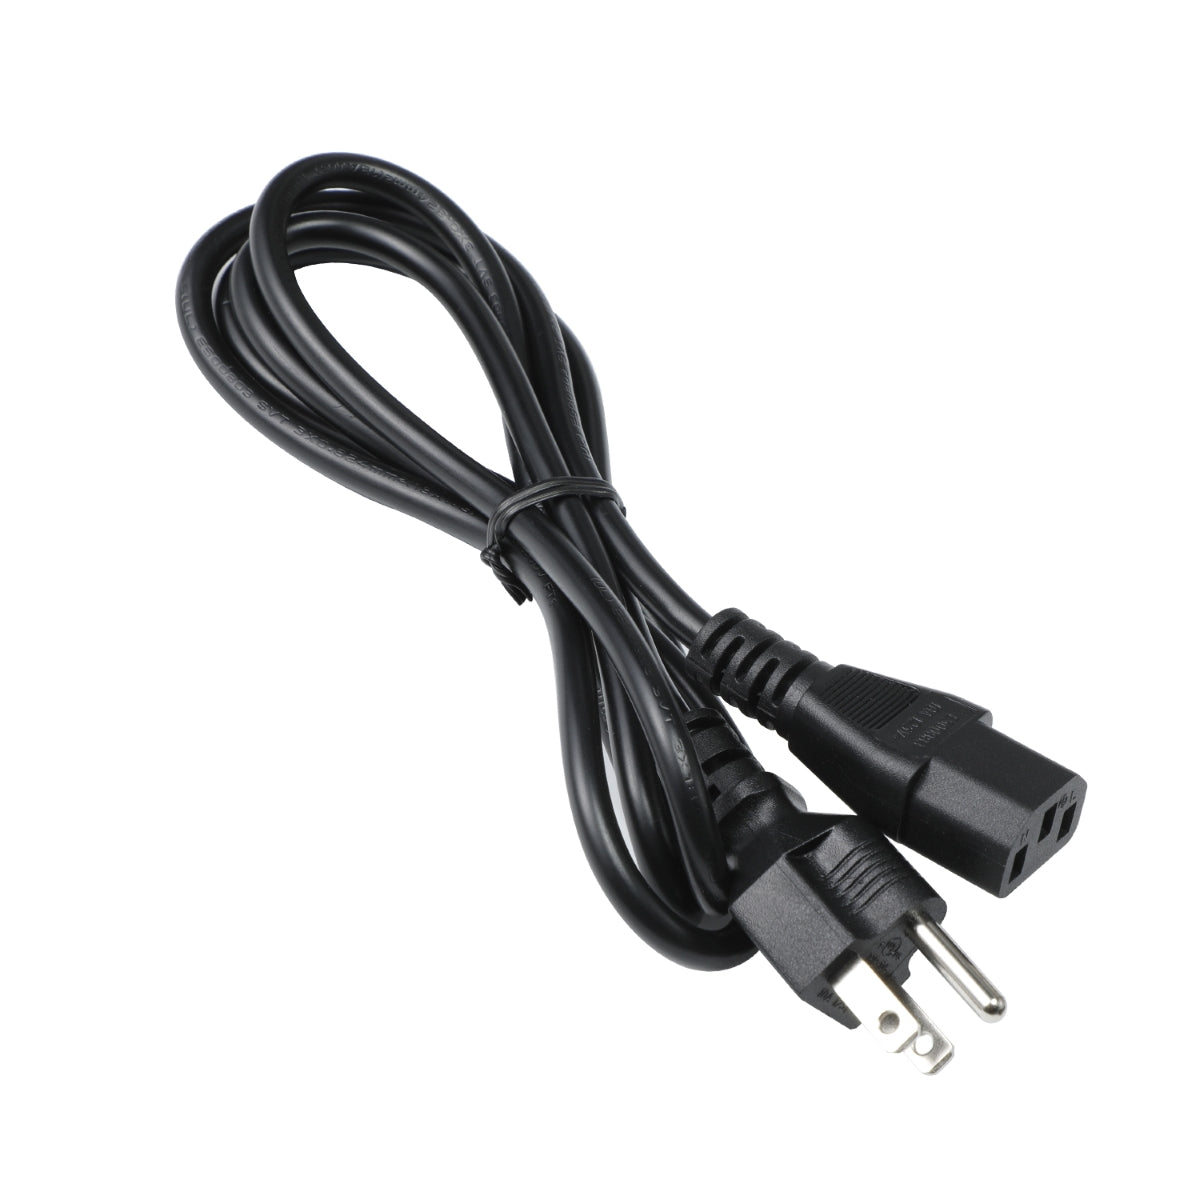 Power Cord for Dell U2717D Monitor